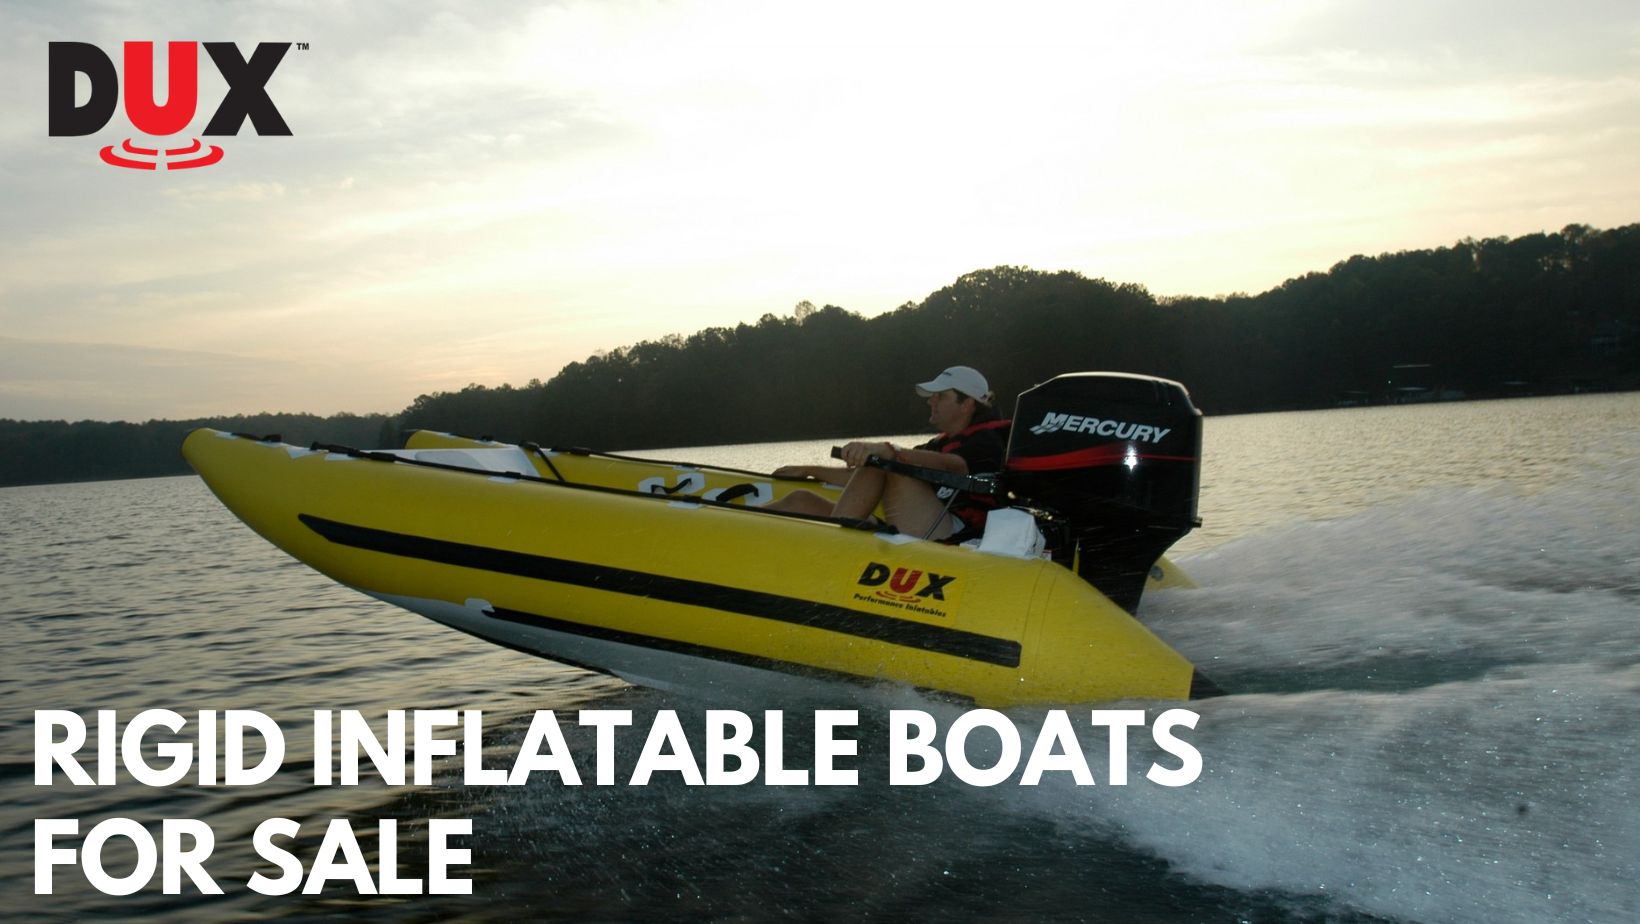 Why Are Rigid Inflatable Boats for Sale Gaining Popularity